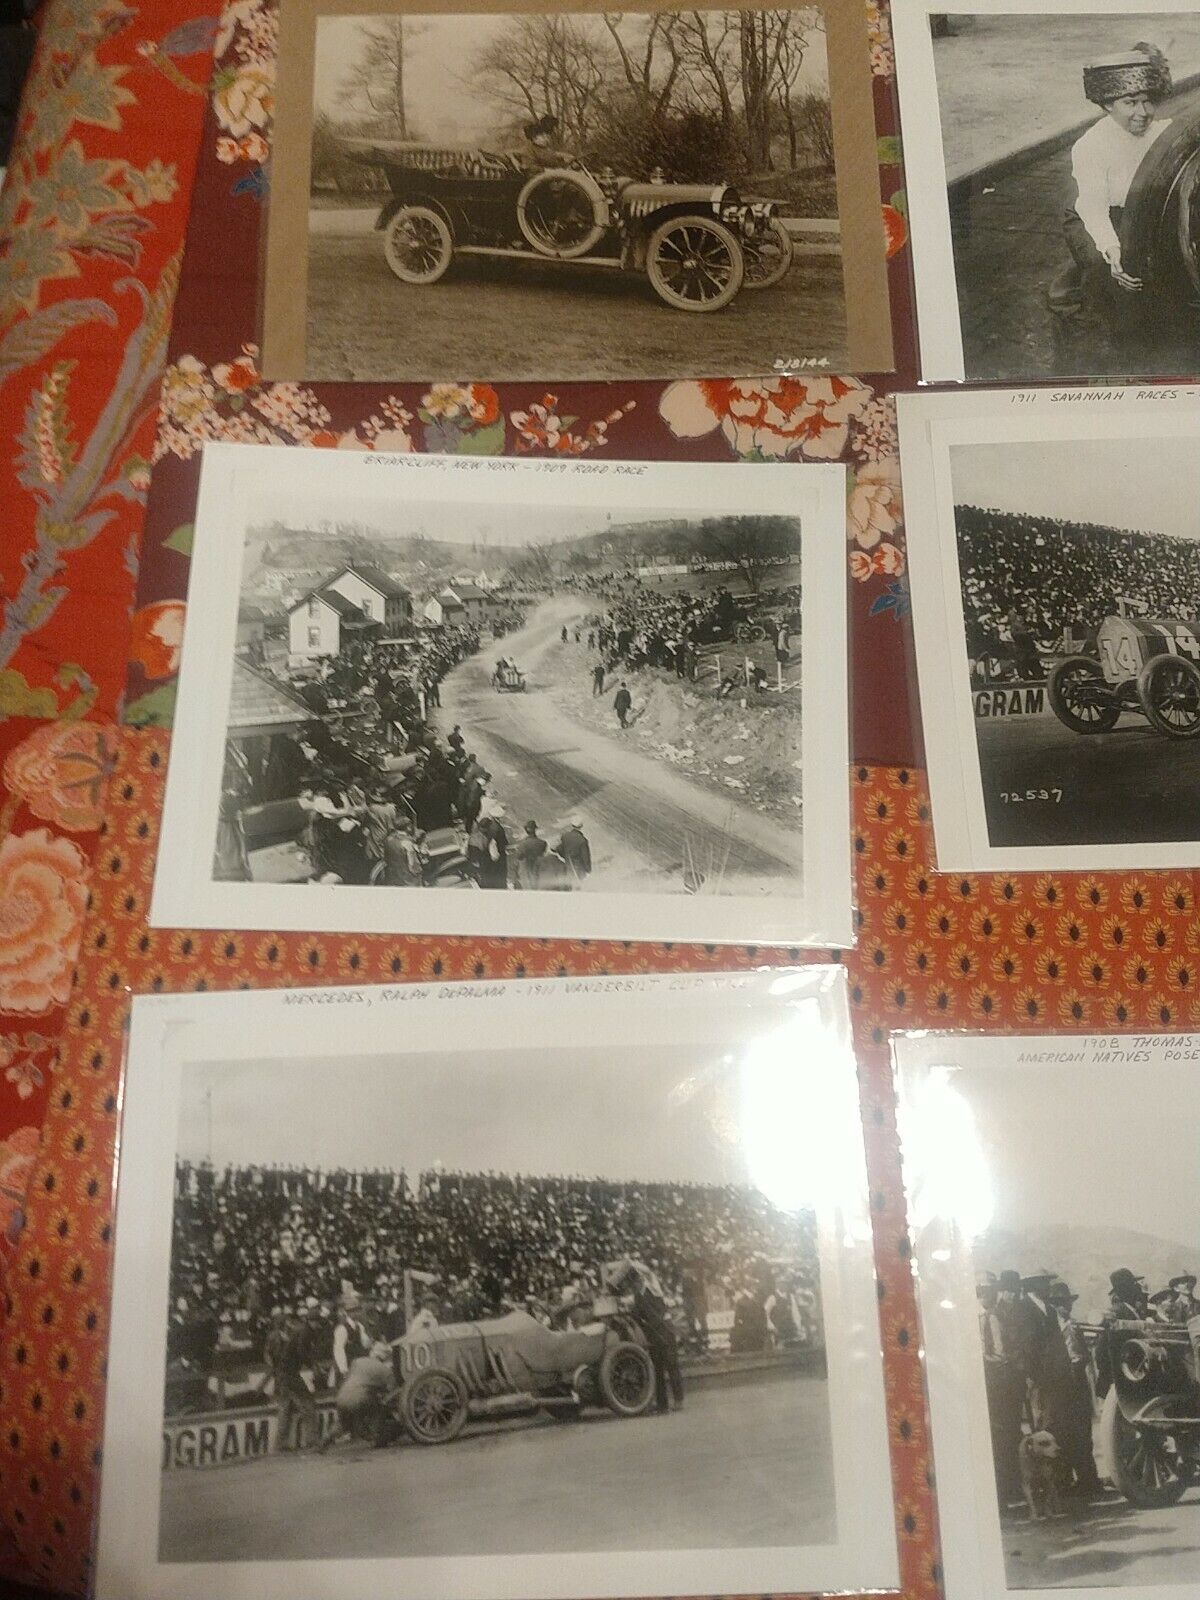 Early 1900s Racing Photos reproduction.